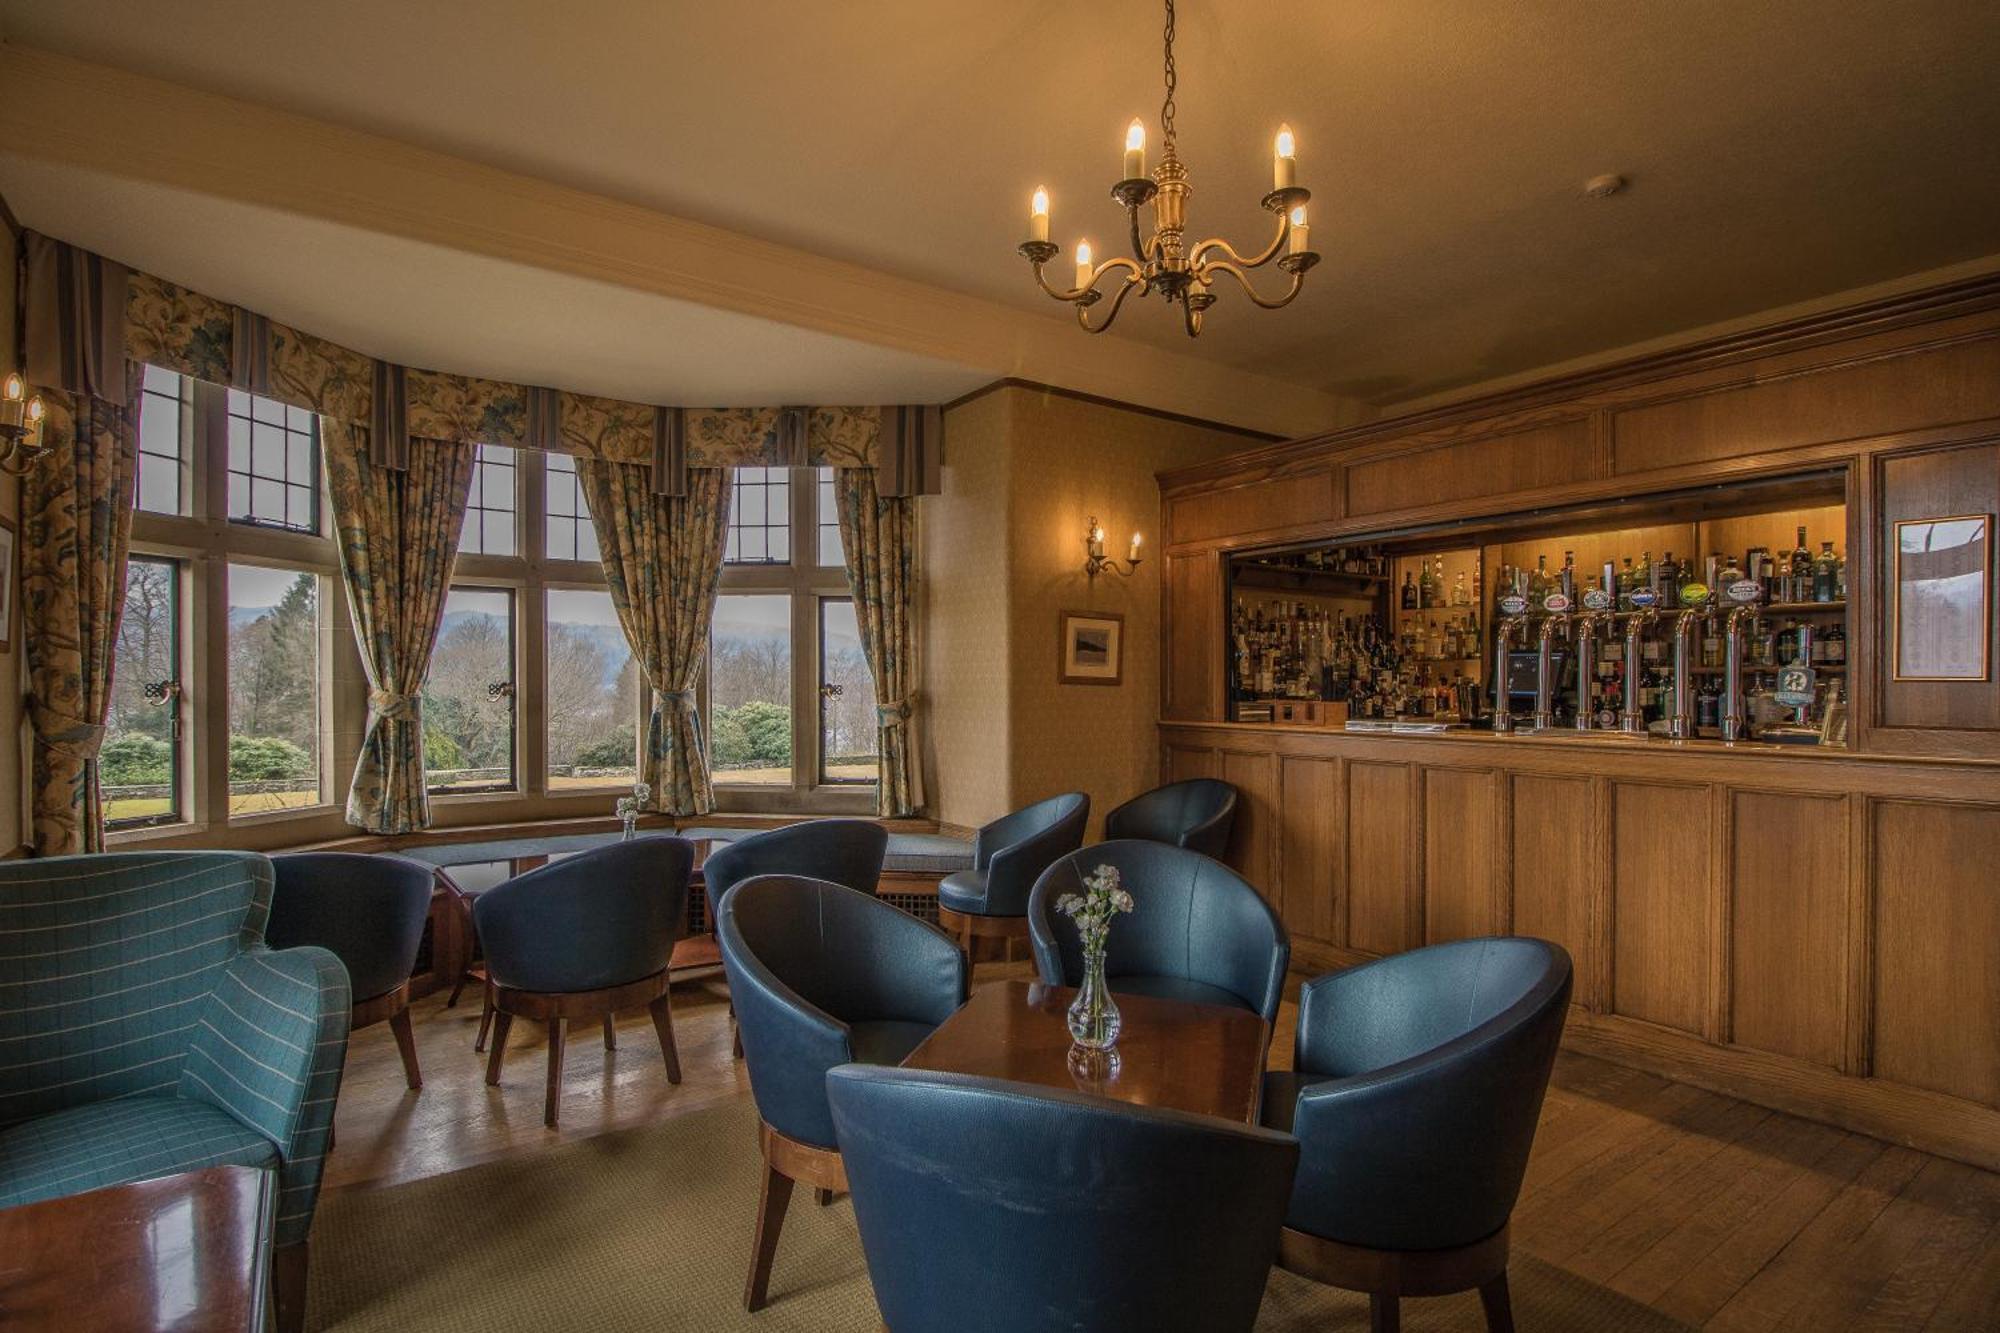 Cragwood Country House Hotel Windermere Extérieur photo